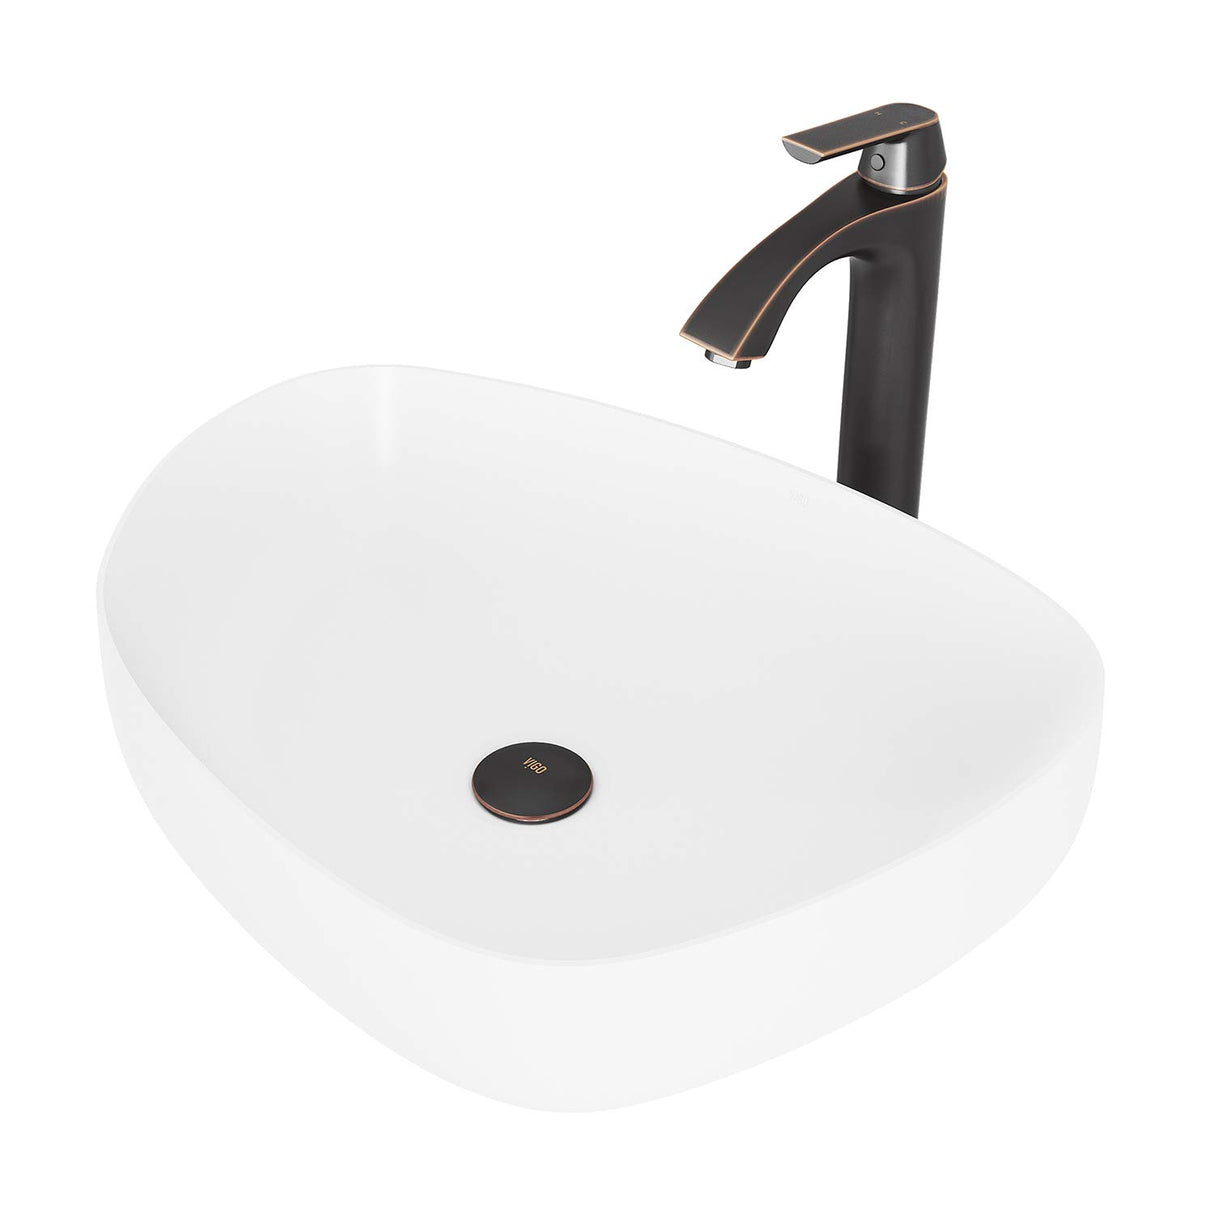 VIGO VGT1251 15.25" L -20.0" W -12.38" H Handmade Countertop Matte Stone Novelty/Specialty Vessel Bathroom Sink Set in Matte White Finish with Antique Rubbed Bronze Faucet and Pop Up Drain